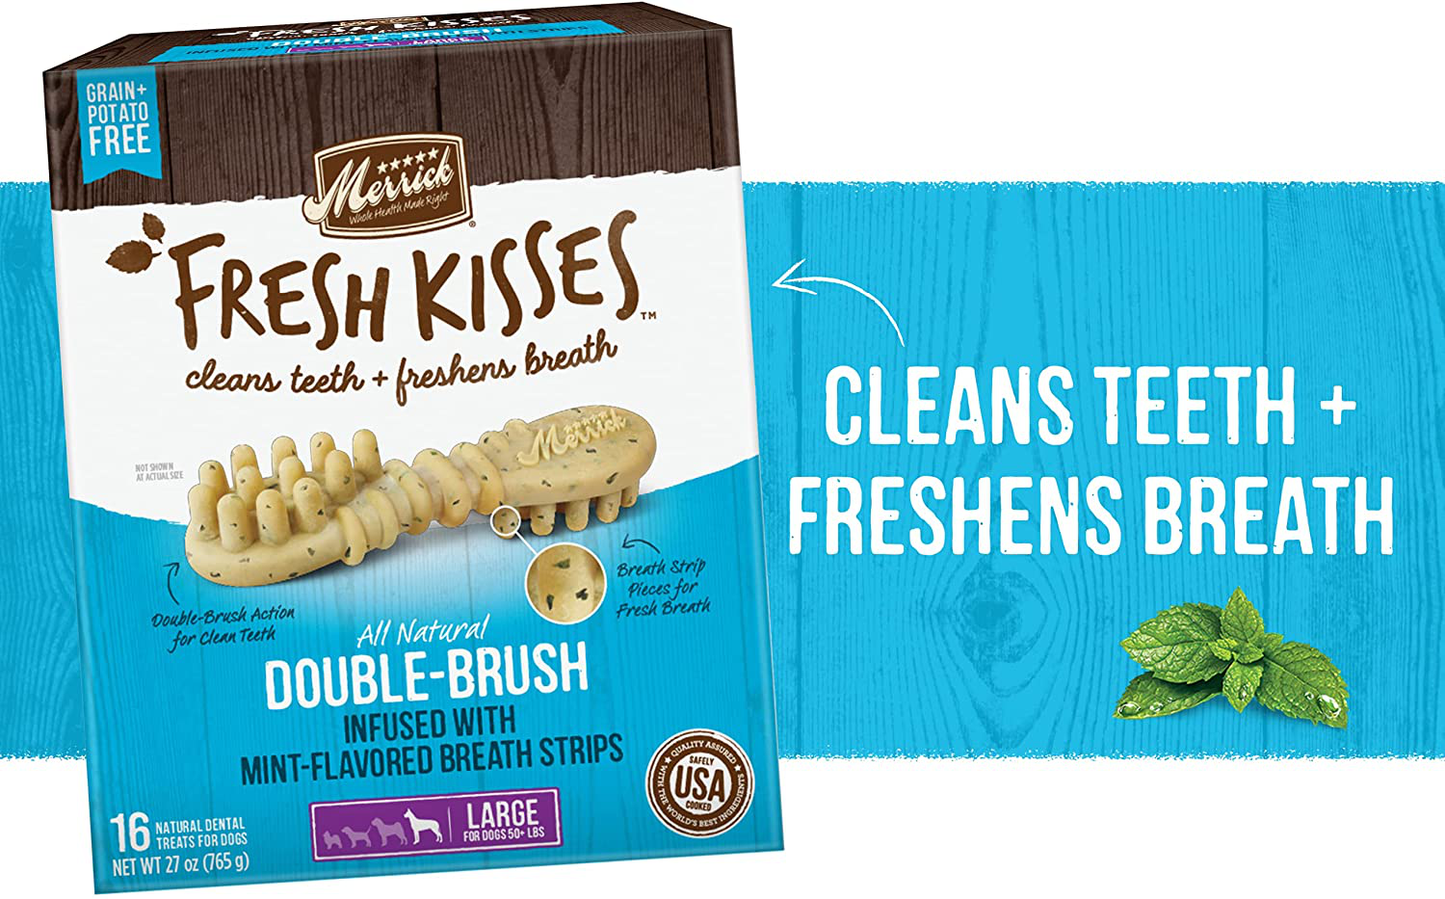 Merrick Fresh Kisses Oral Care Dental Dog Treats for Large Dogs over 50 Lbs Animals & Pet Supplies > Pet Supplies > Dog Supplies > Dog Treats Merrick   